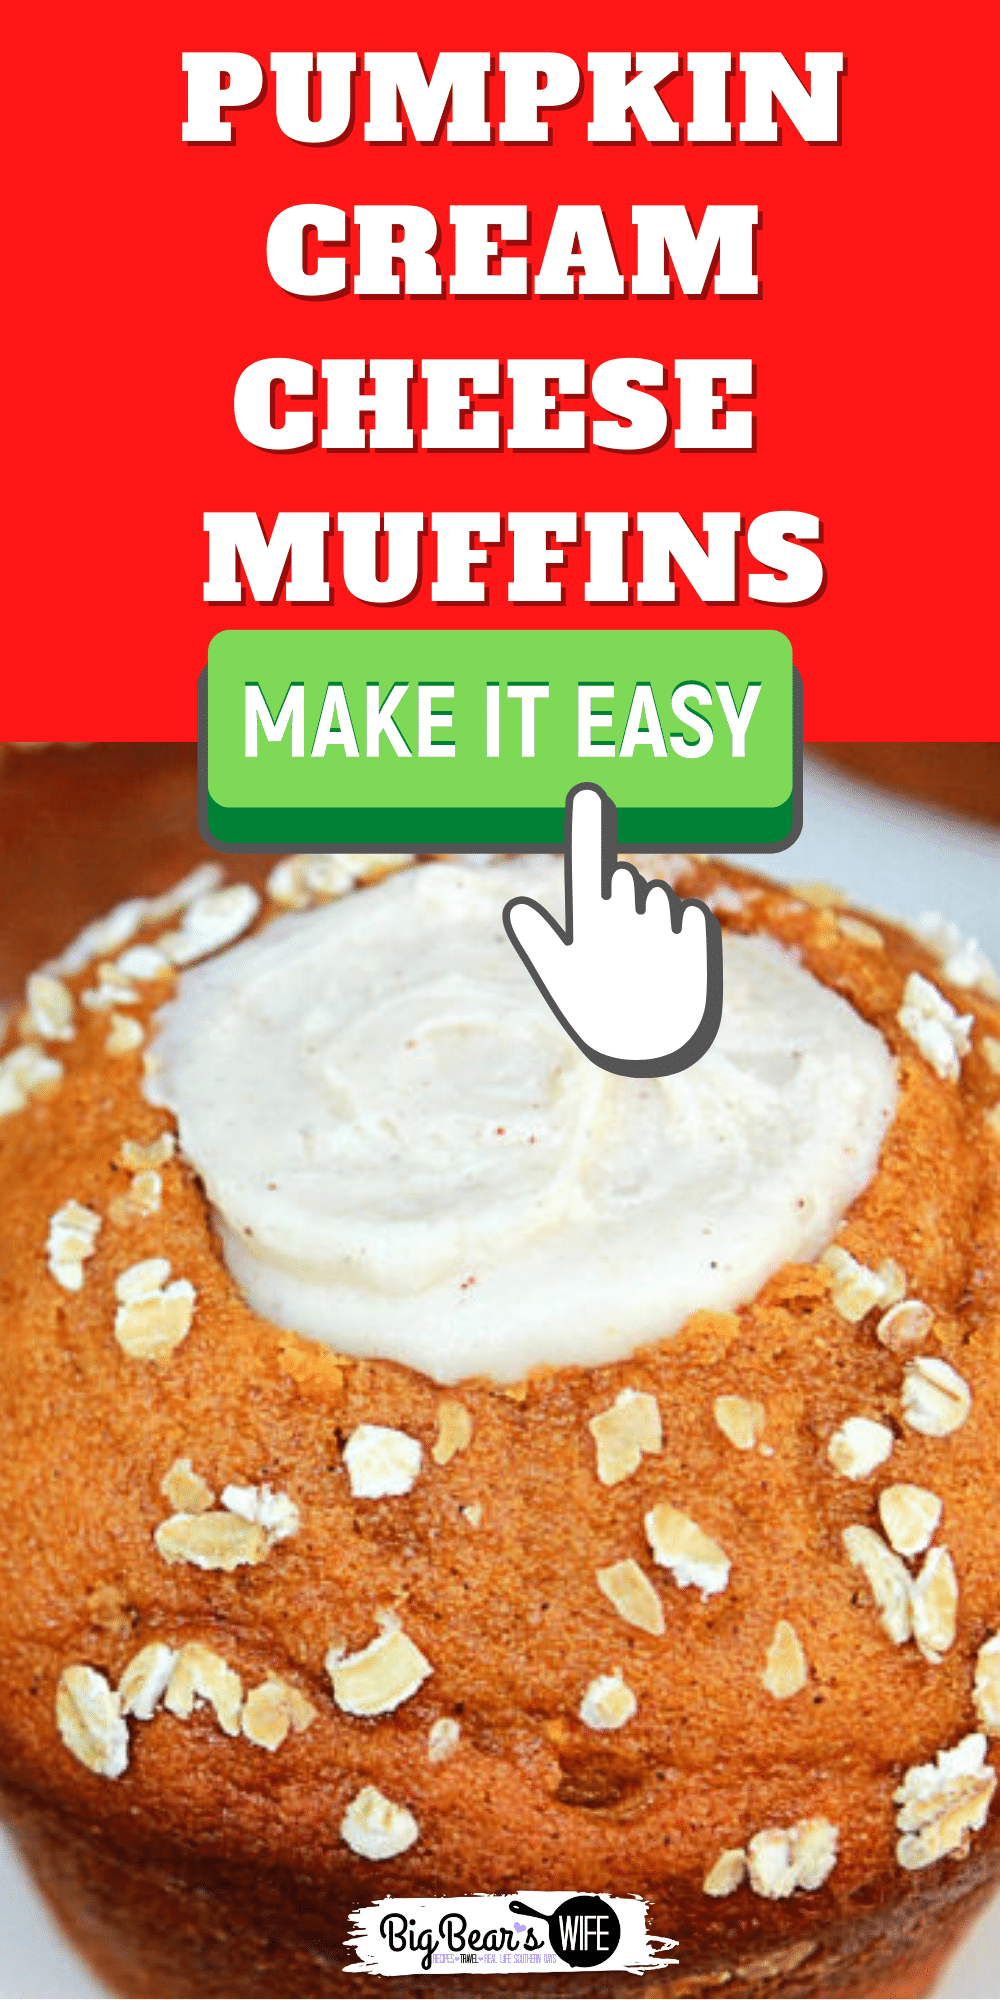 Pumpkin Cream Cheese Muffins - Soft pumpkin muffins made with pumpkin, pumpkin spice and cinnamon, topped with oats and filled with a homemade pumpkin spice cream cheese filling.  via @bigbearswife